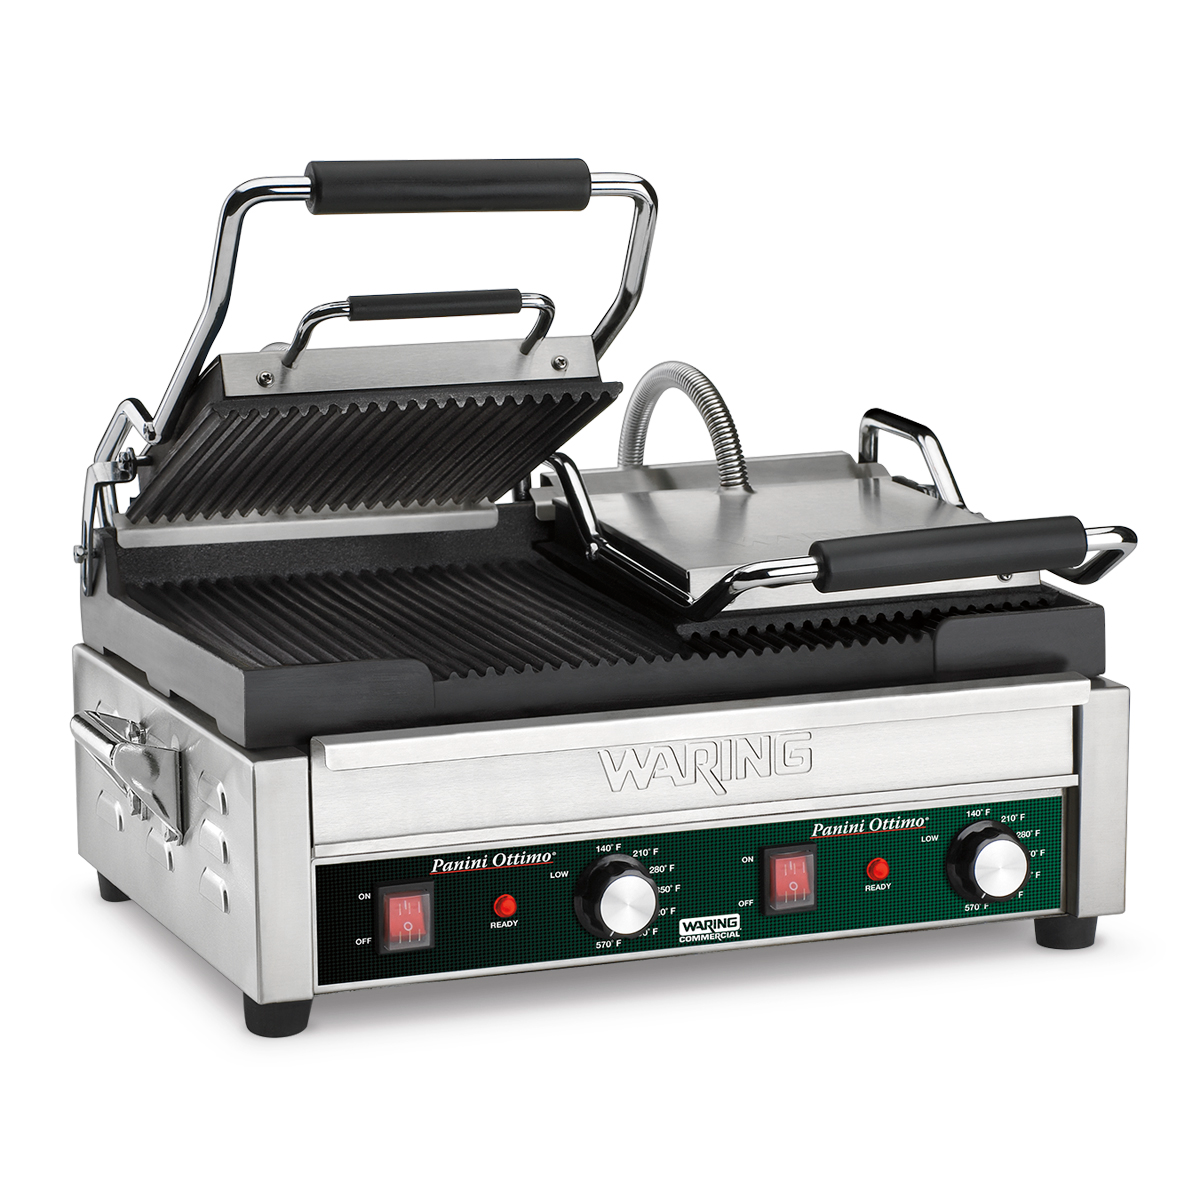 US Sold Only Panini Maker, iSiLER 4 Slice Panini Press Grill